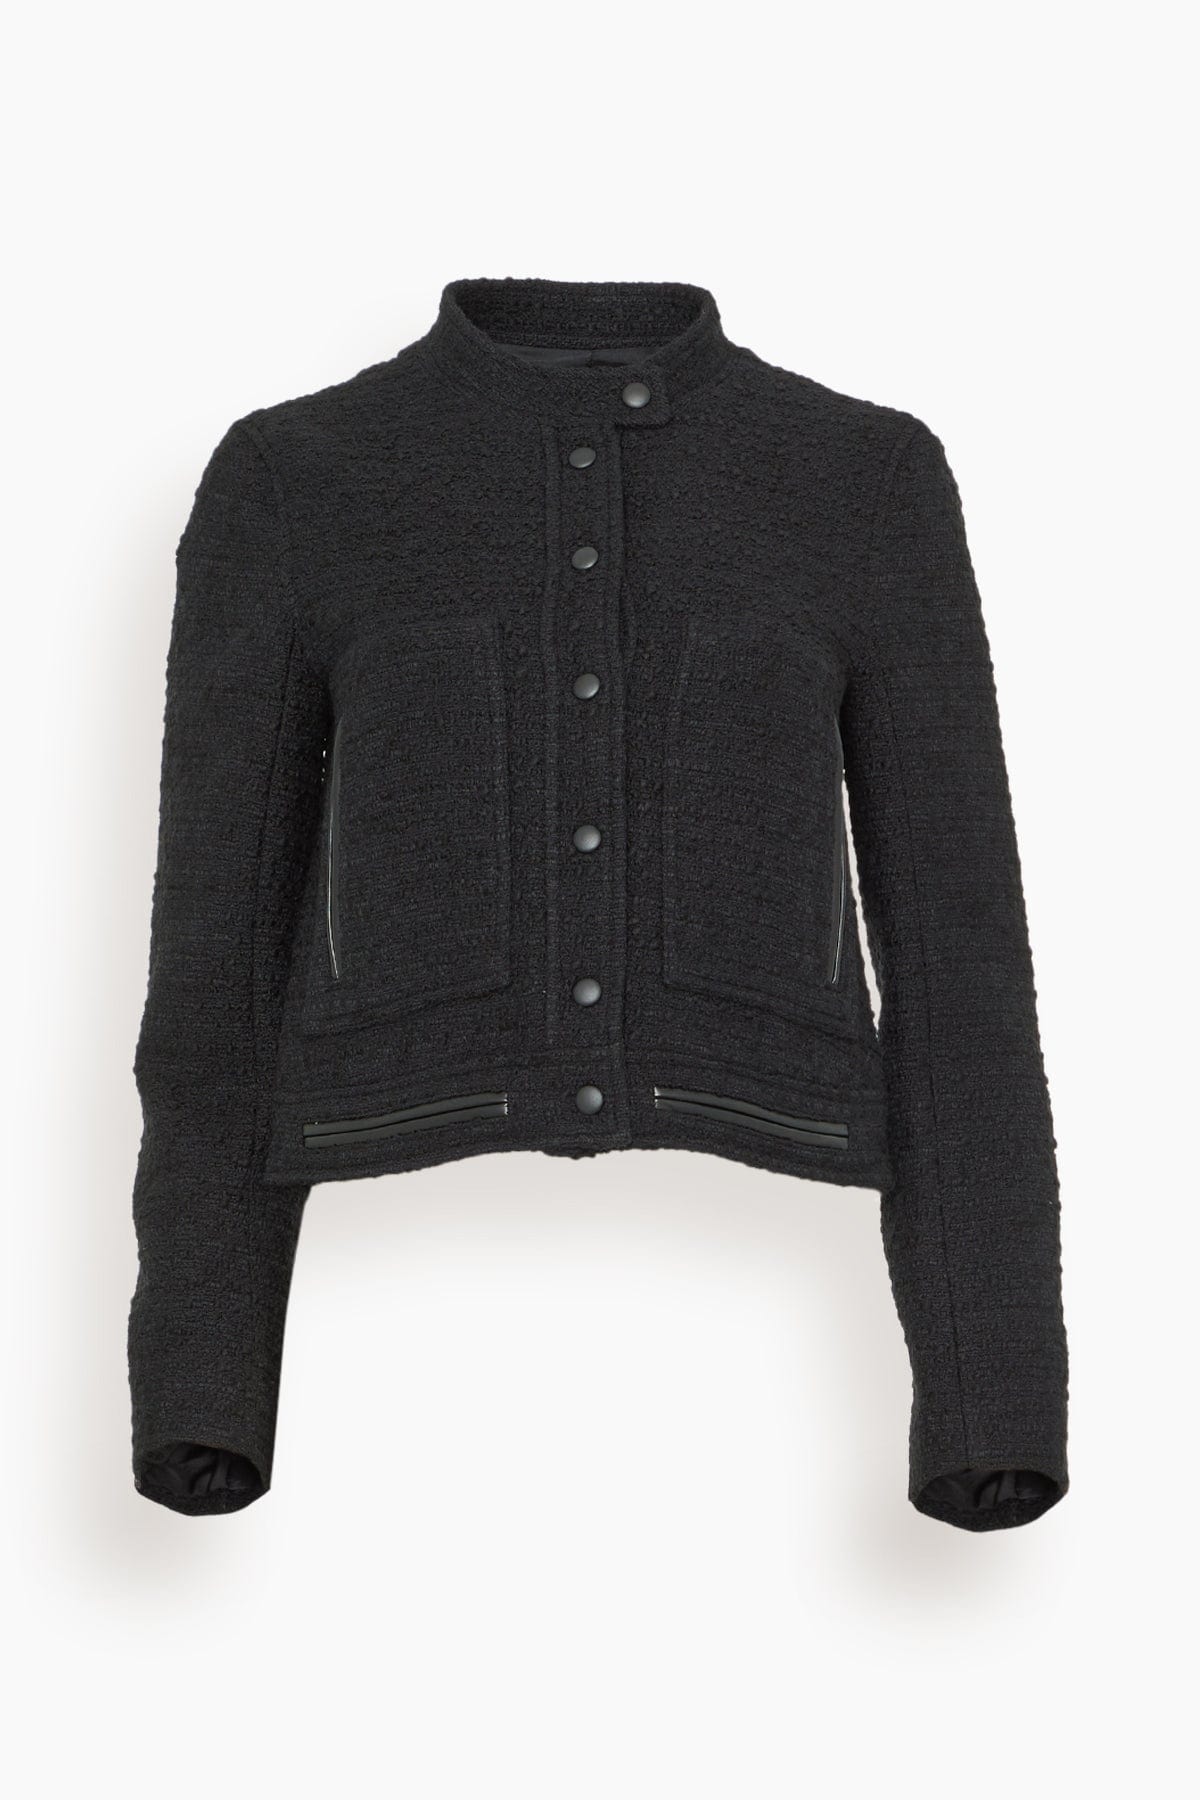 Hampden Clothing Jackets Alice Suiting Jacket in Black